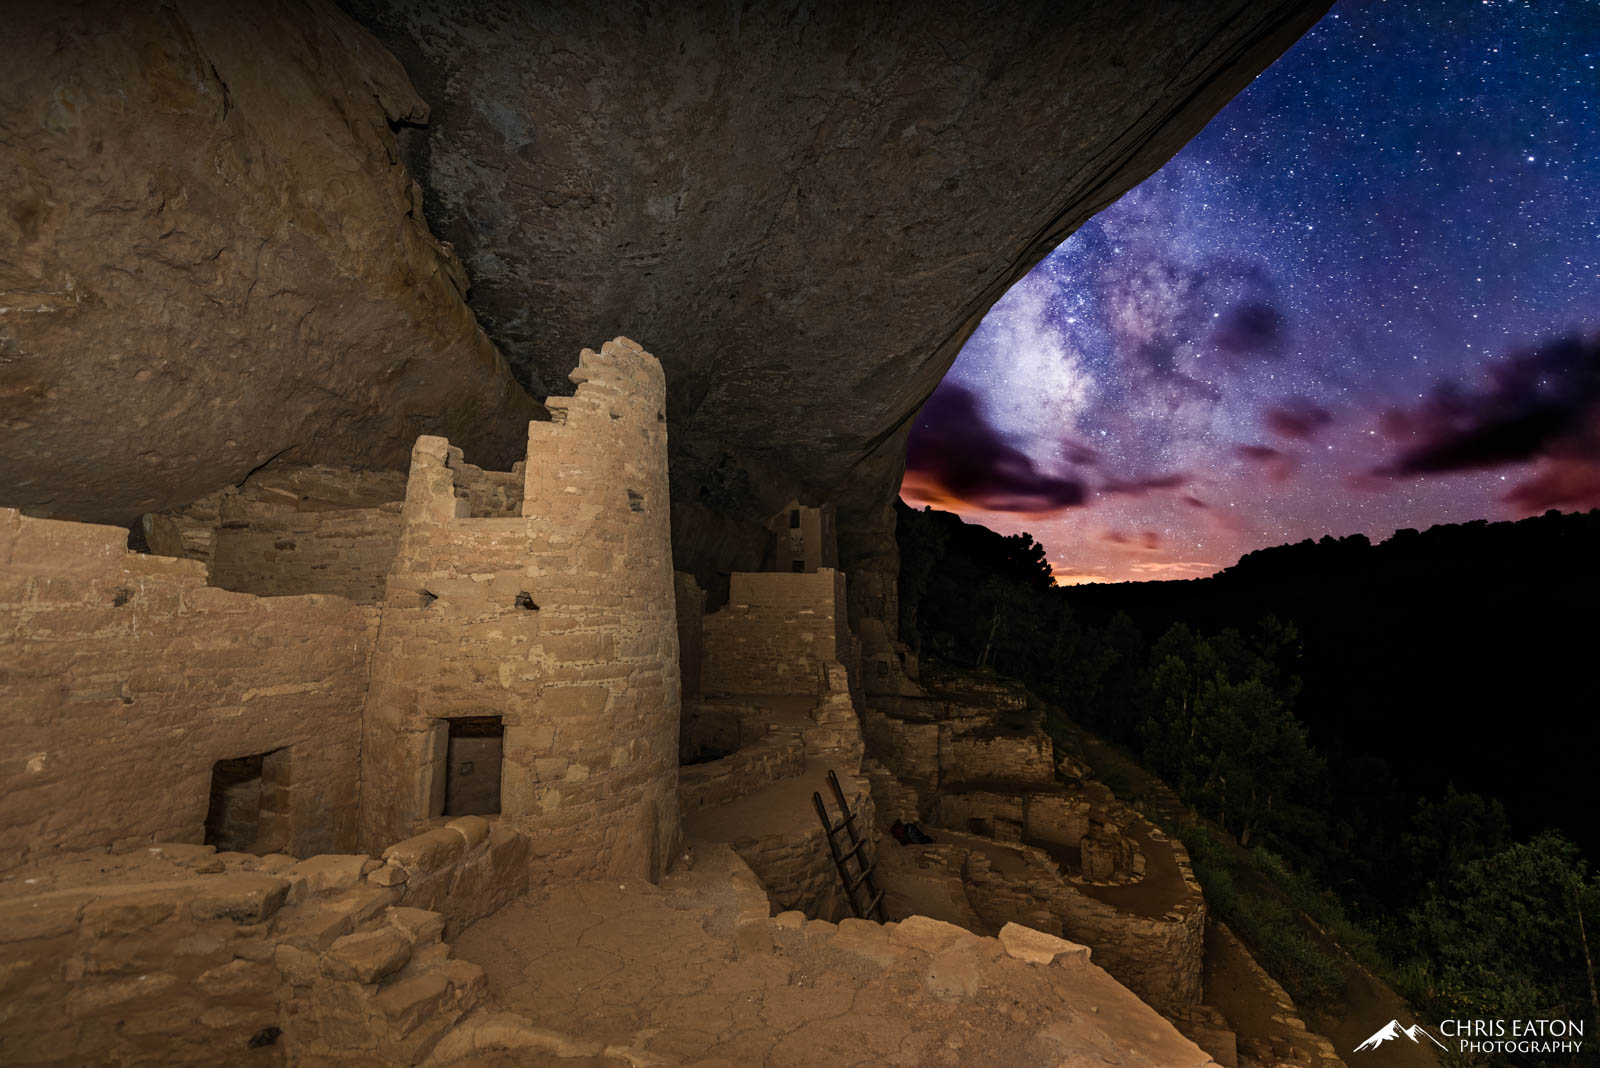 Looking out from Cliff Palace at the Milky Way galaxy in Mesa Verde National Park.